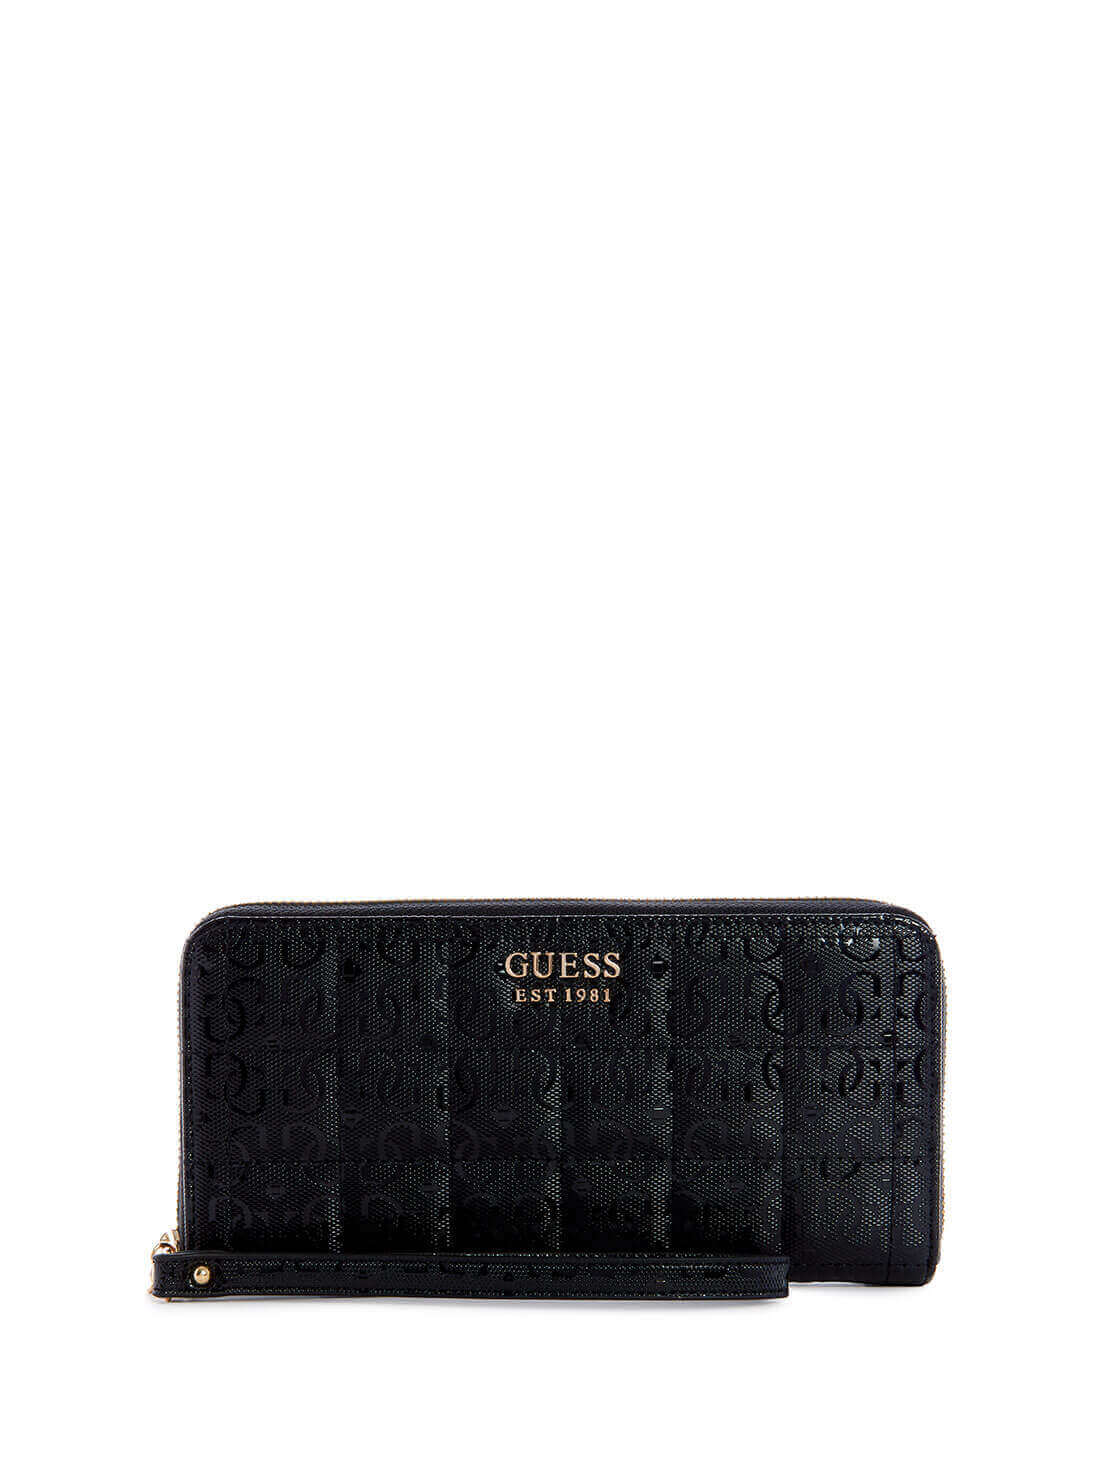 GUESS Womens Black Kobo Quattro G Large Wallet GG841146 Front View